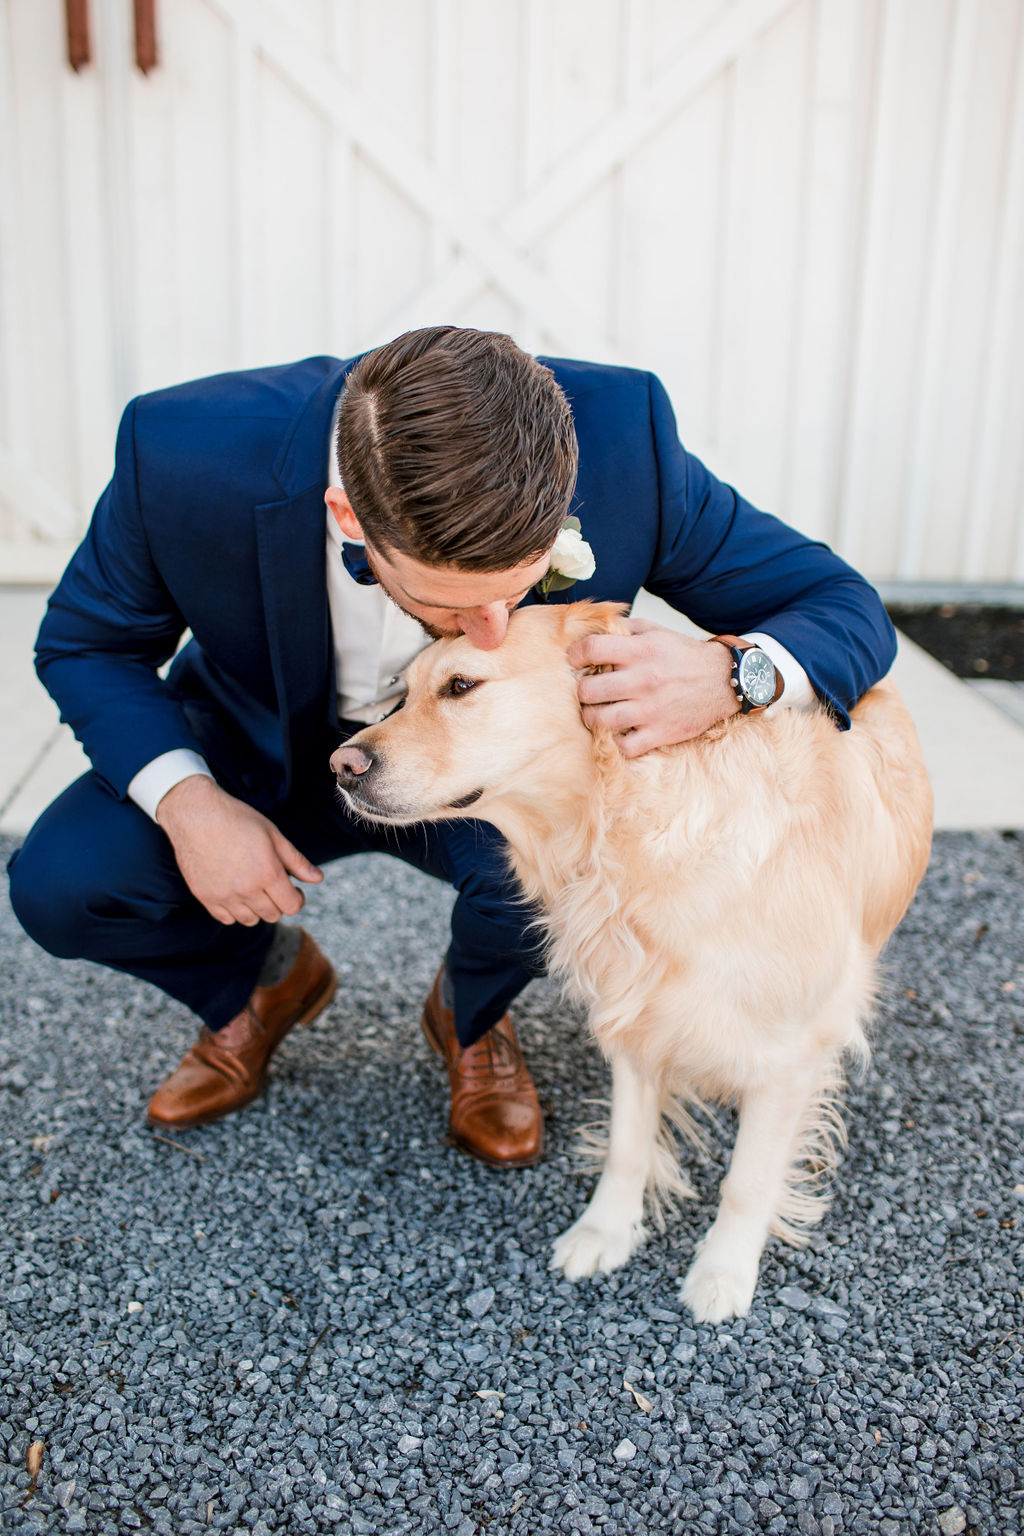 Groom with dog portrait: Intimate Barn Wedding from John Myers Photography